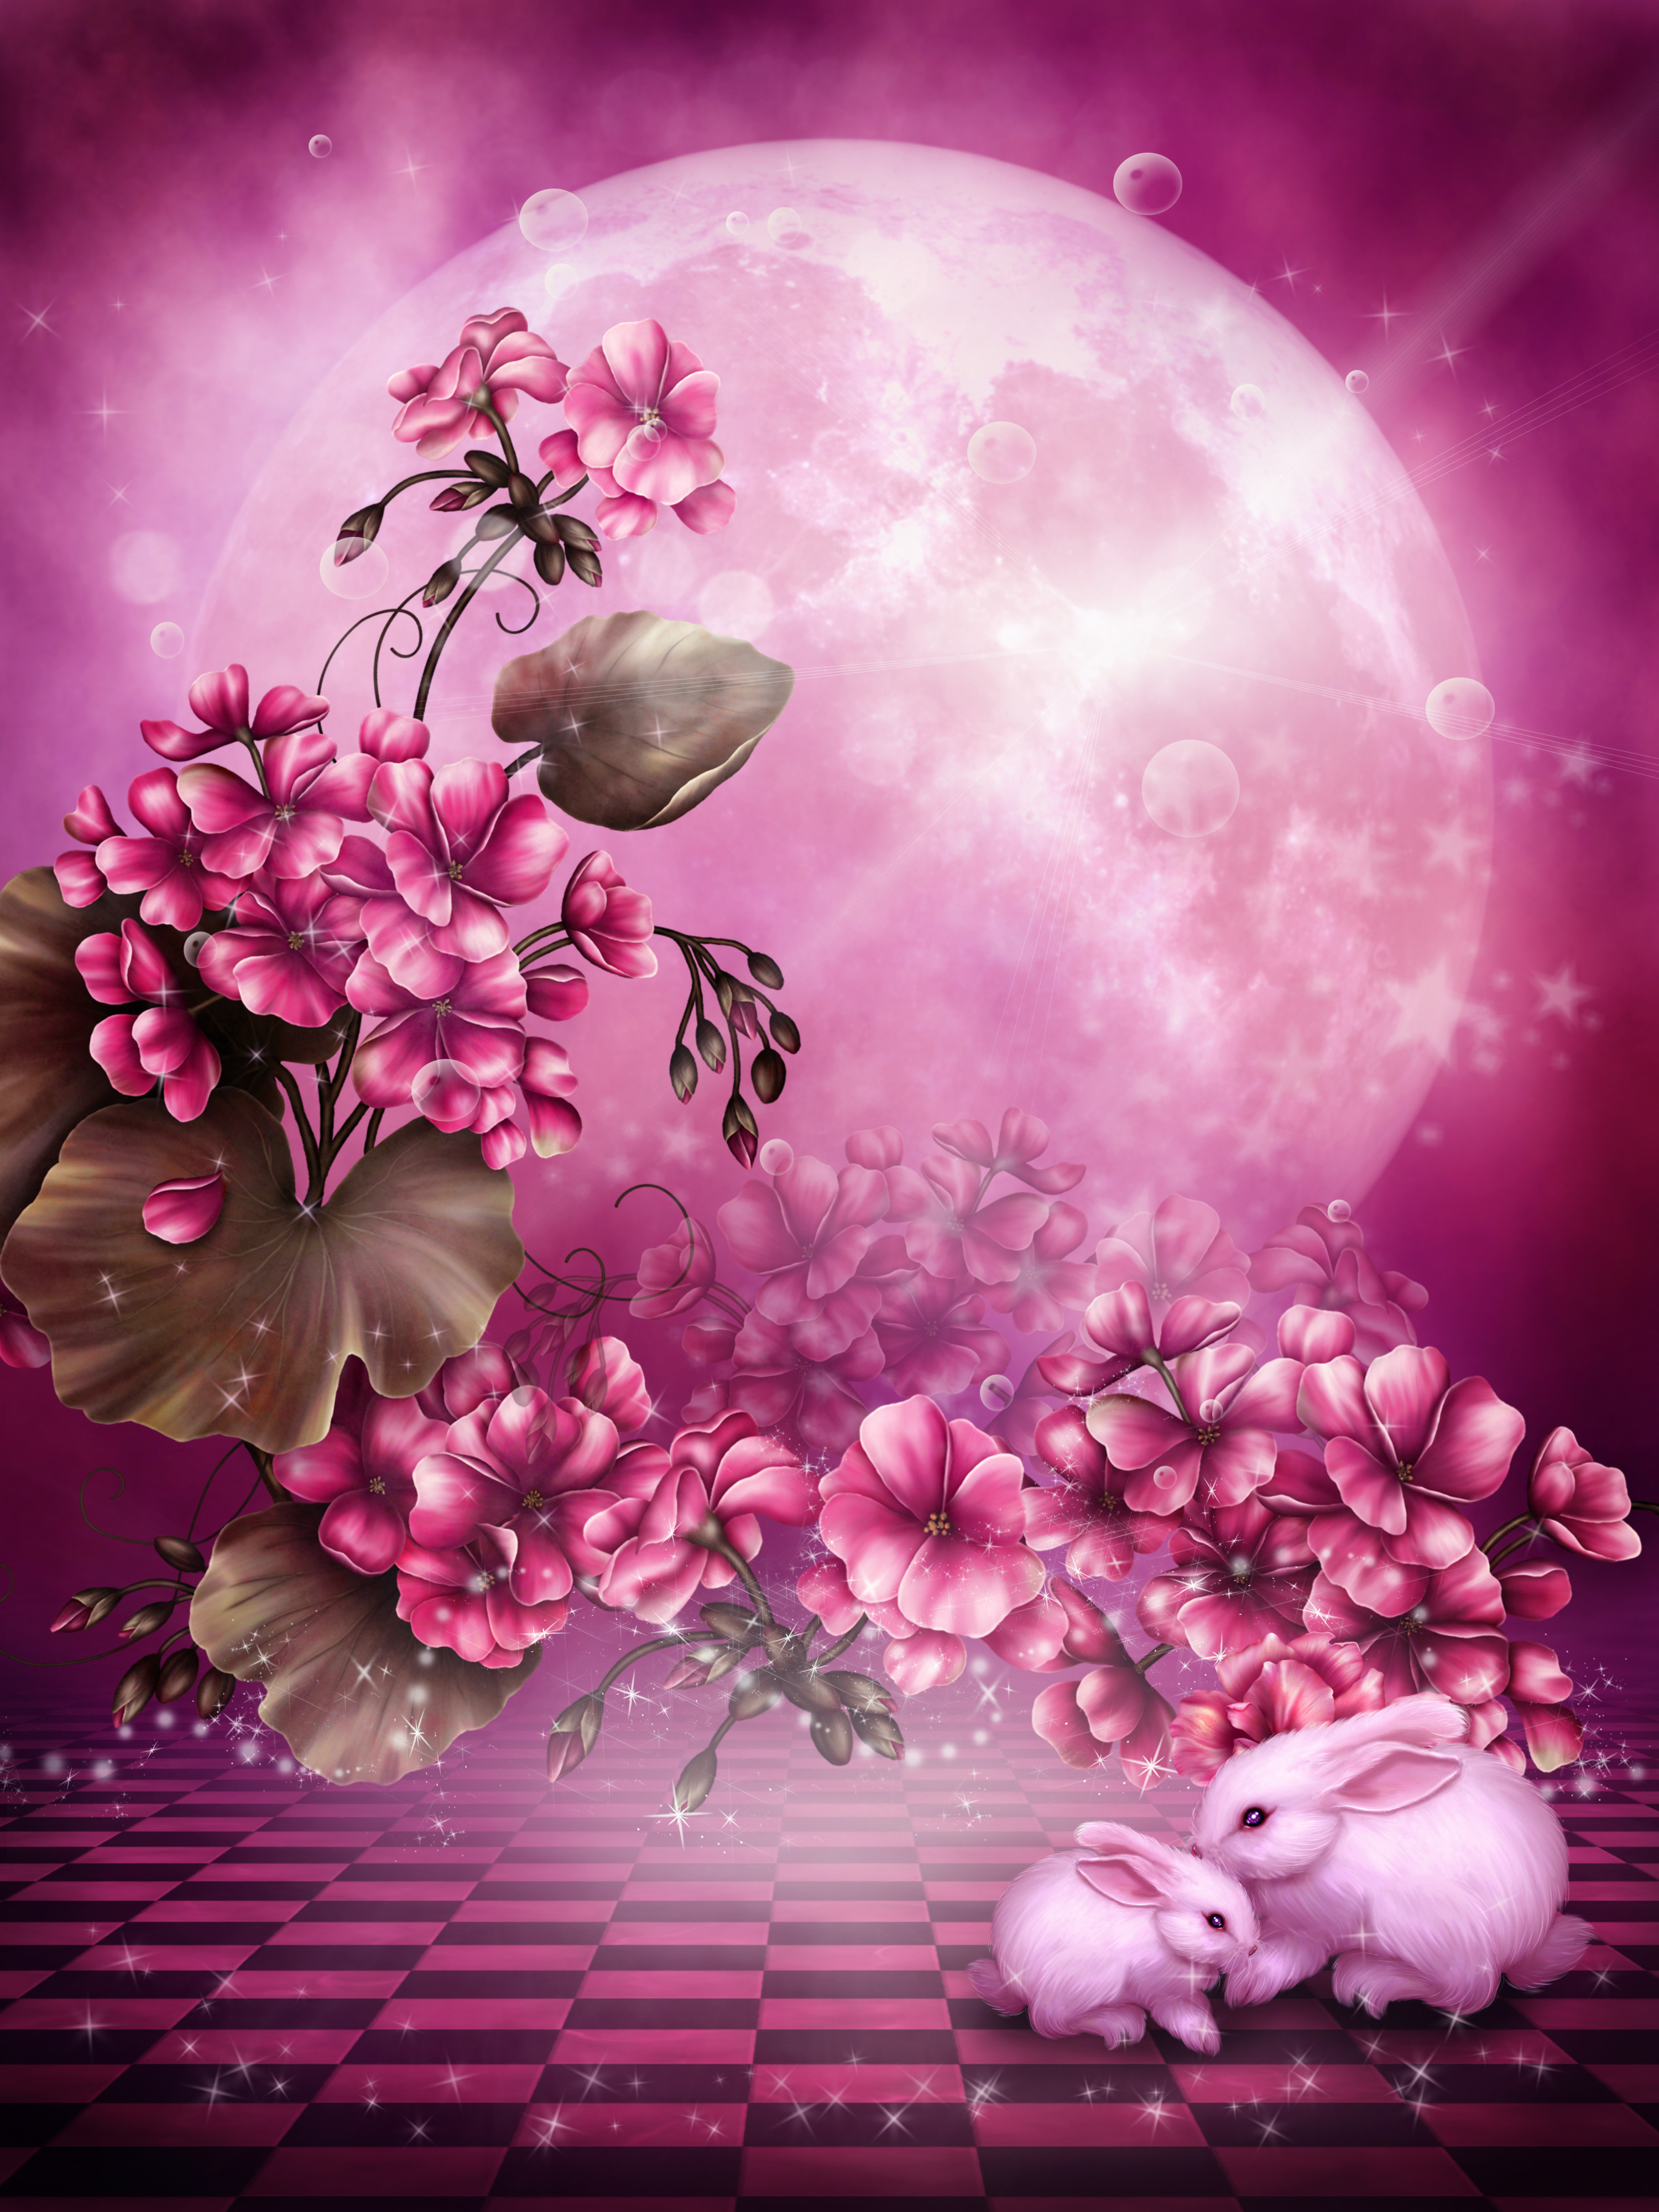 pictures, flowers, plants, rabbits, red download HD wallpaper